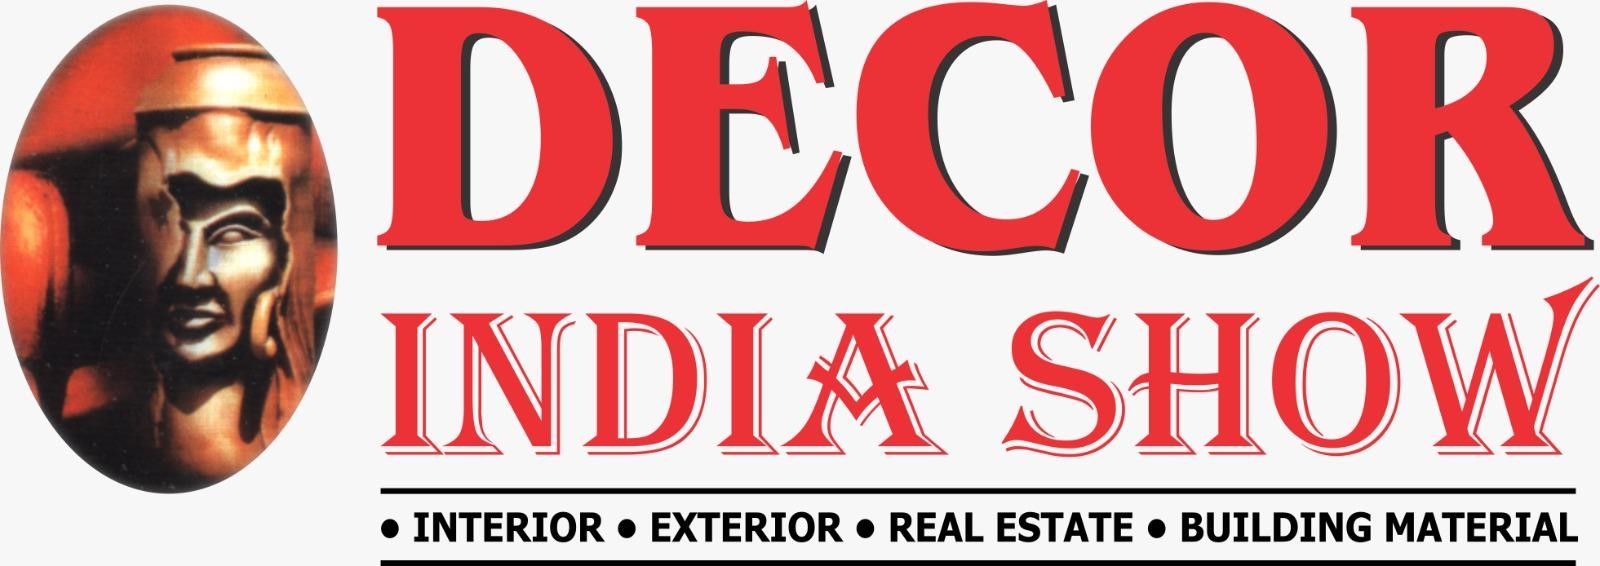 Decor India Show Jaipur 16th – 20th February 2024 23rd Edition – The interior tells your story, while the exterior sets the stage.”